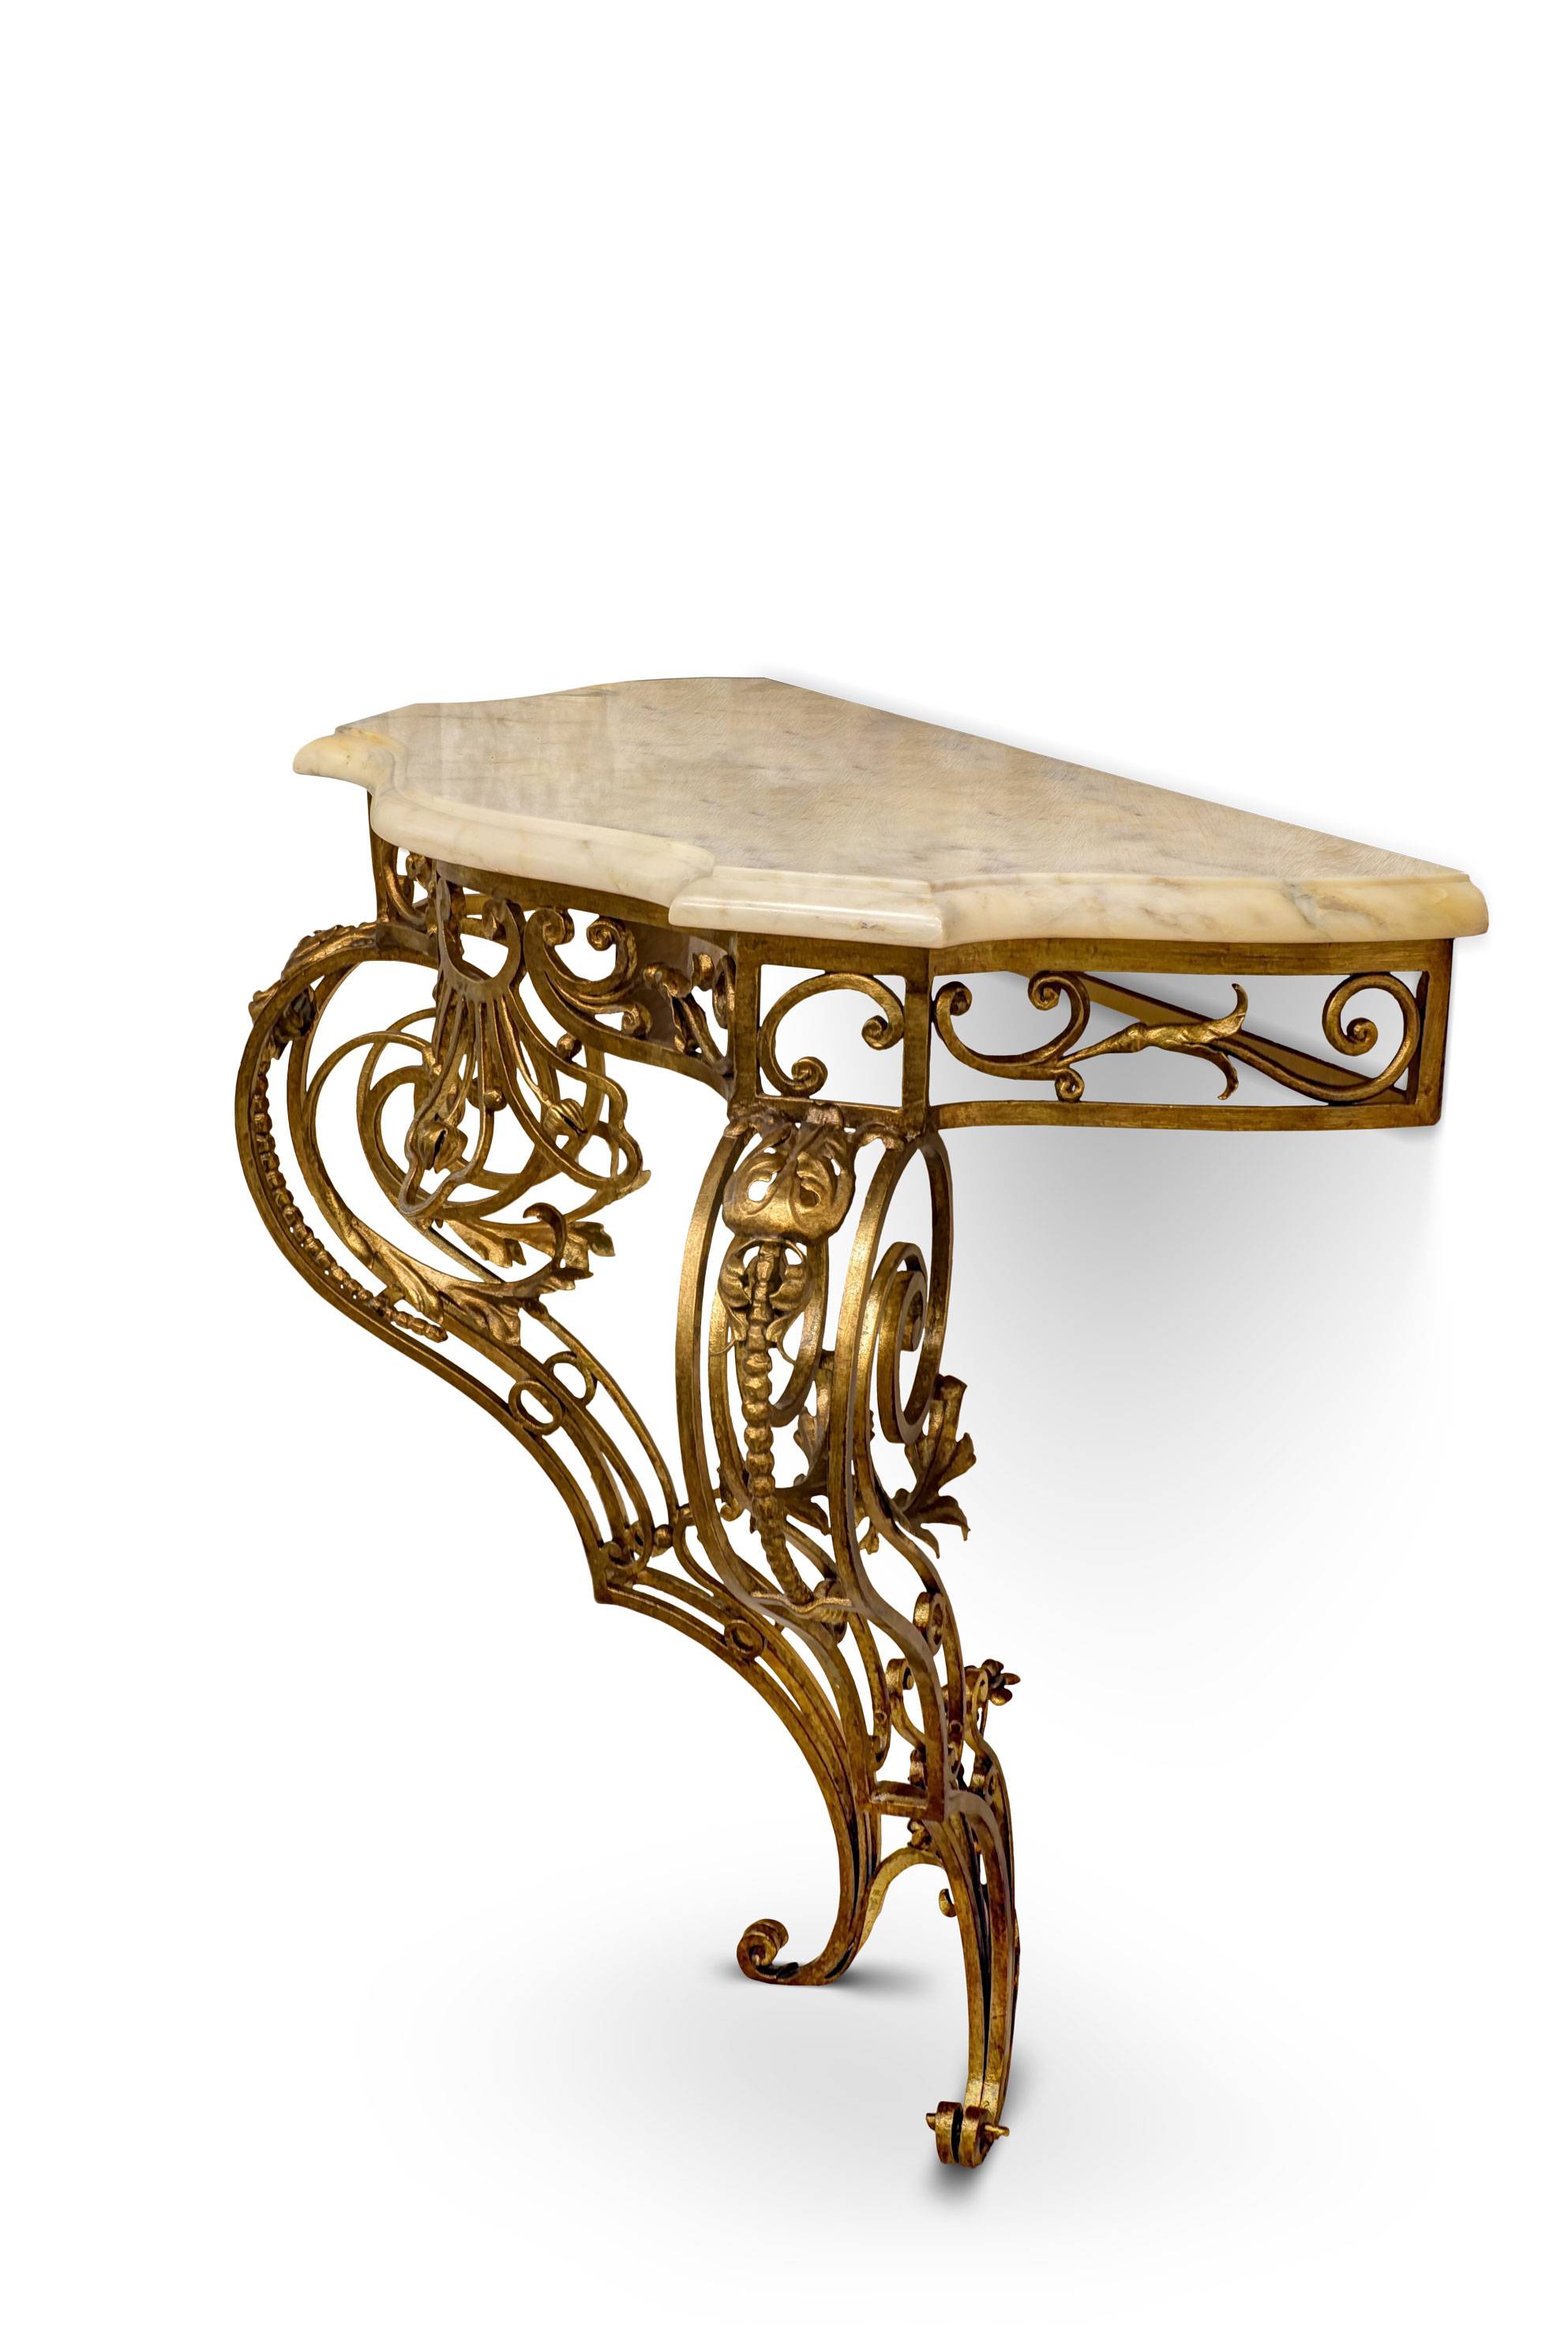 ART. 2085 – The elegance of luxury classic Console made in Italy by C.G. Capelletti.